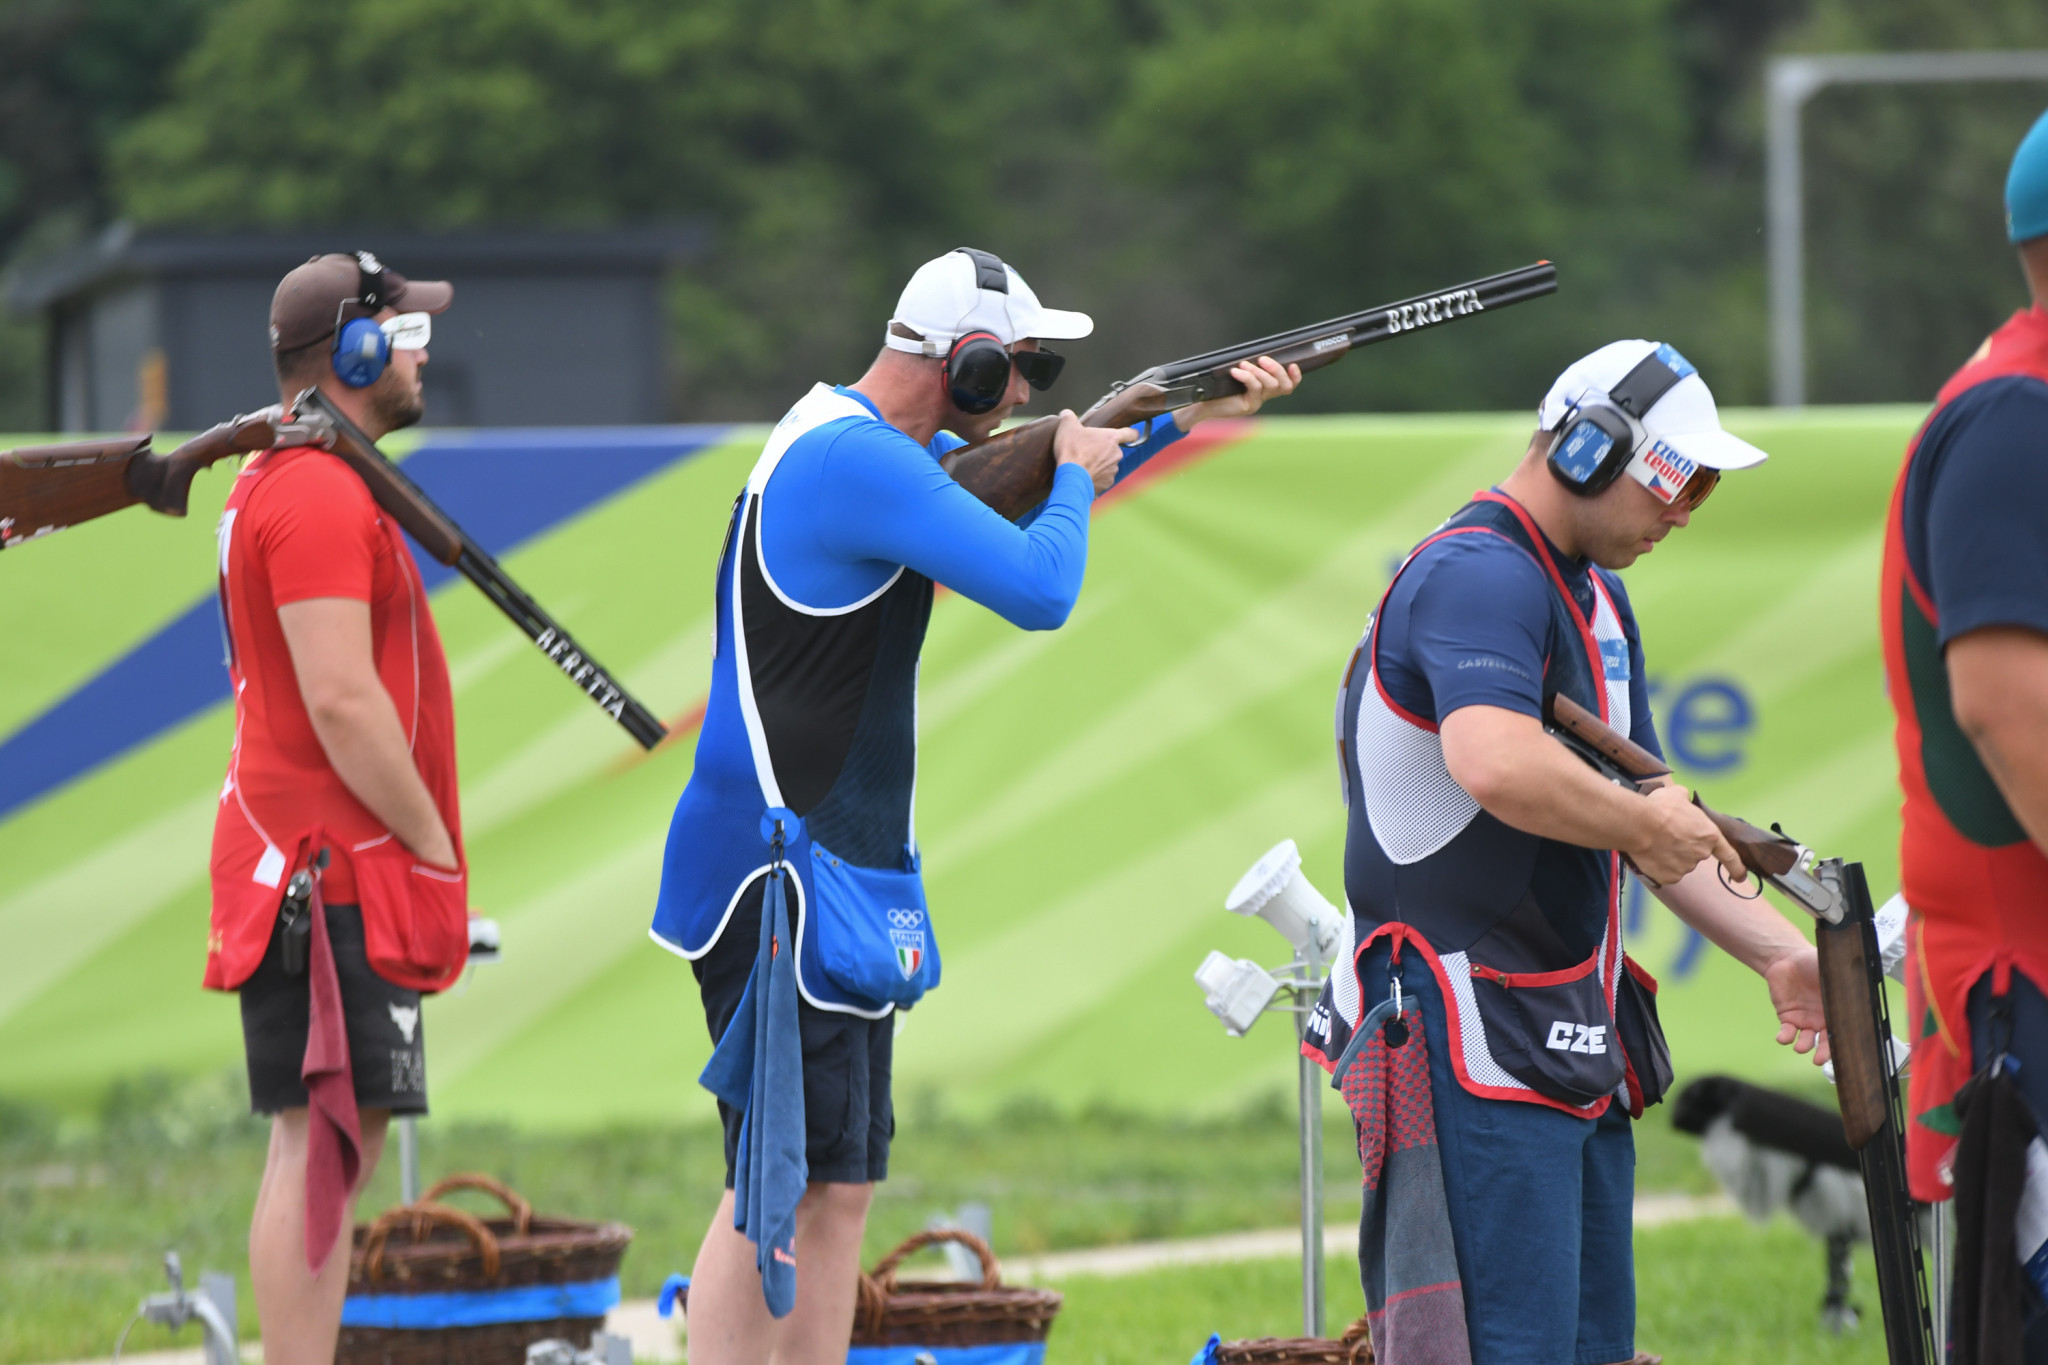 Mauro De Filippis, centre, won Italy's 24th gold and seventh in shooting at the European Games ©Kraków-Małopolska 2023